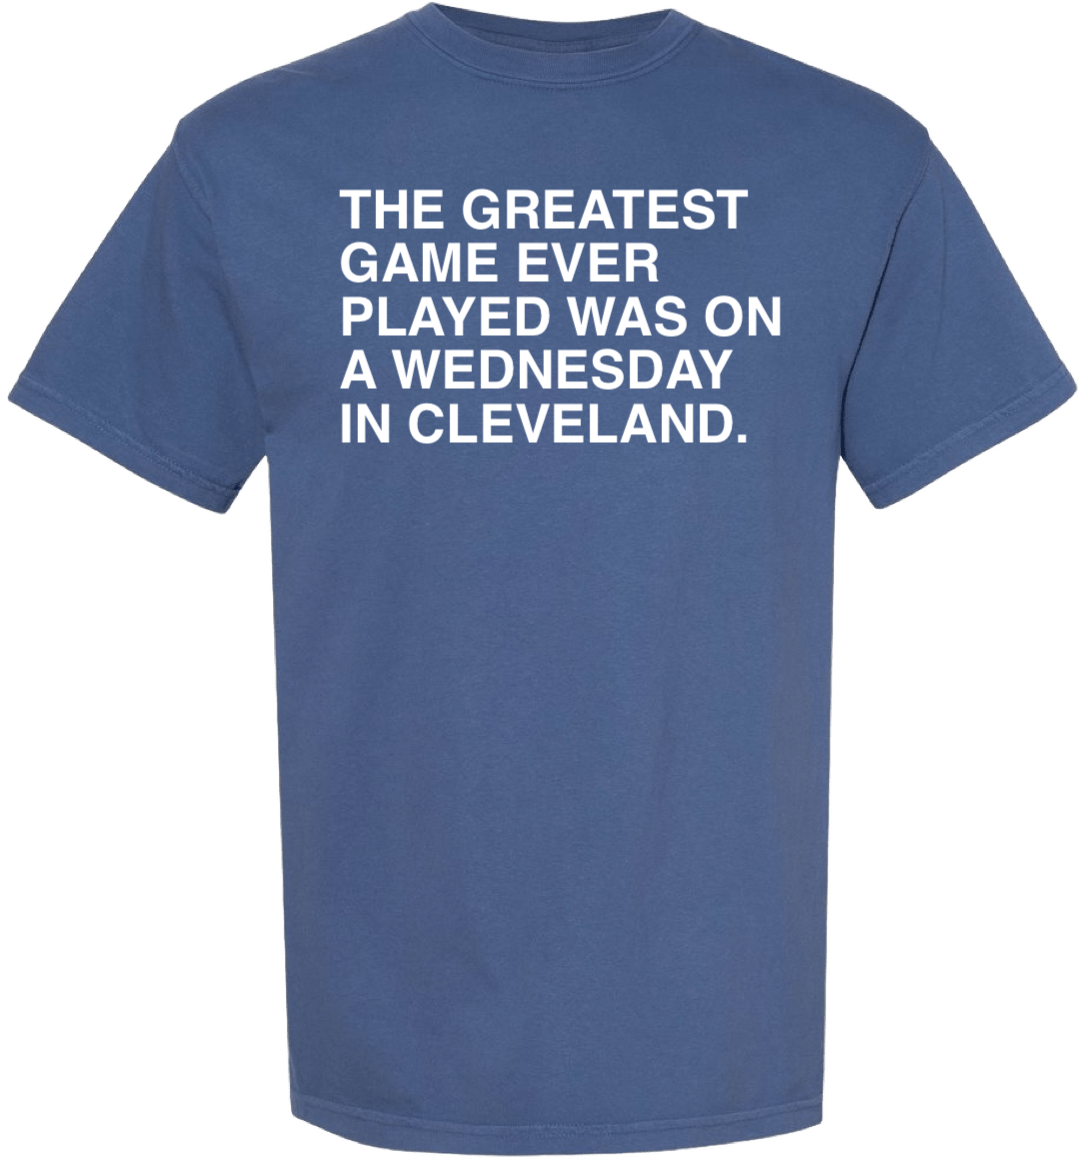 THE GREATEST GAME EVER PLAYED COMFORT COLORS. - OBVIOUS SHIRTS